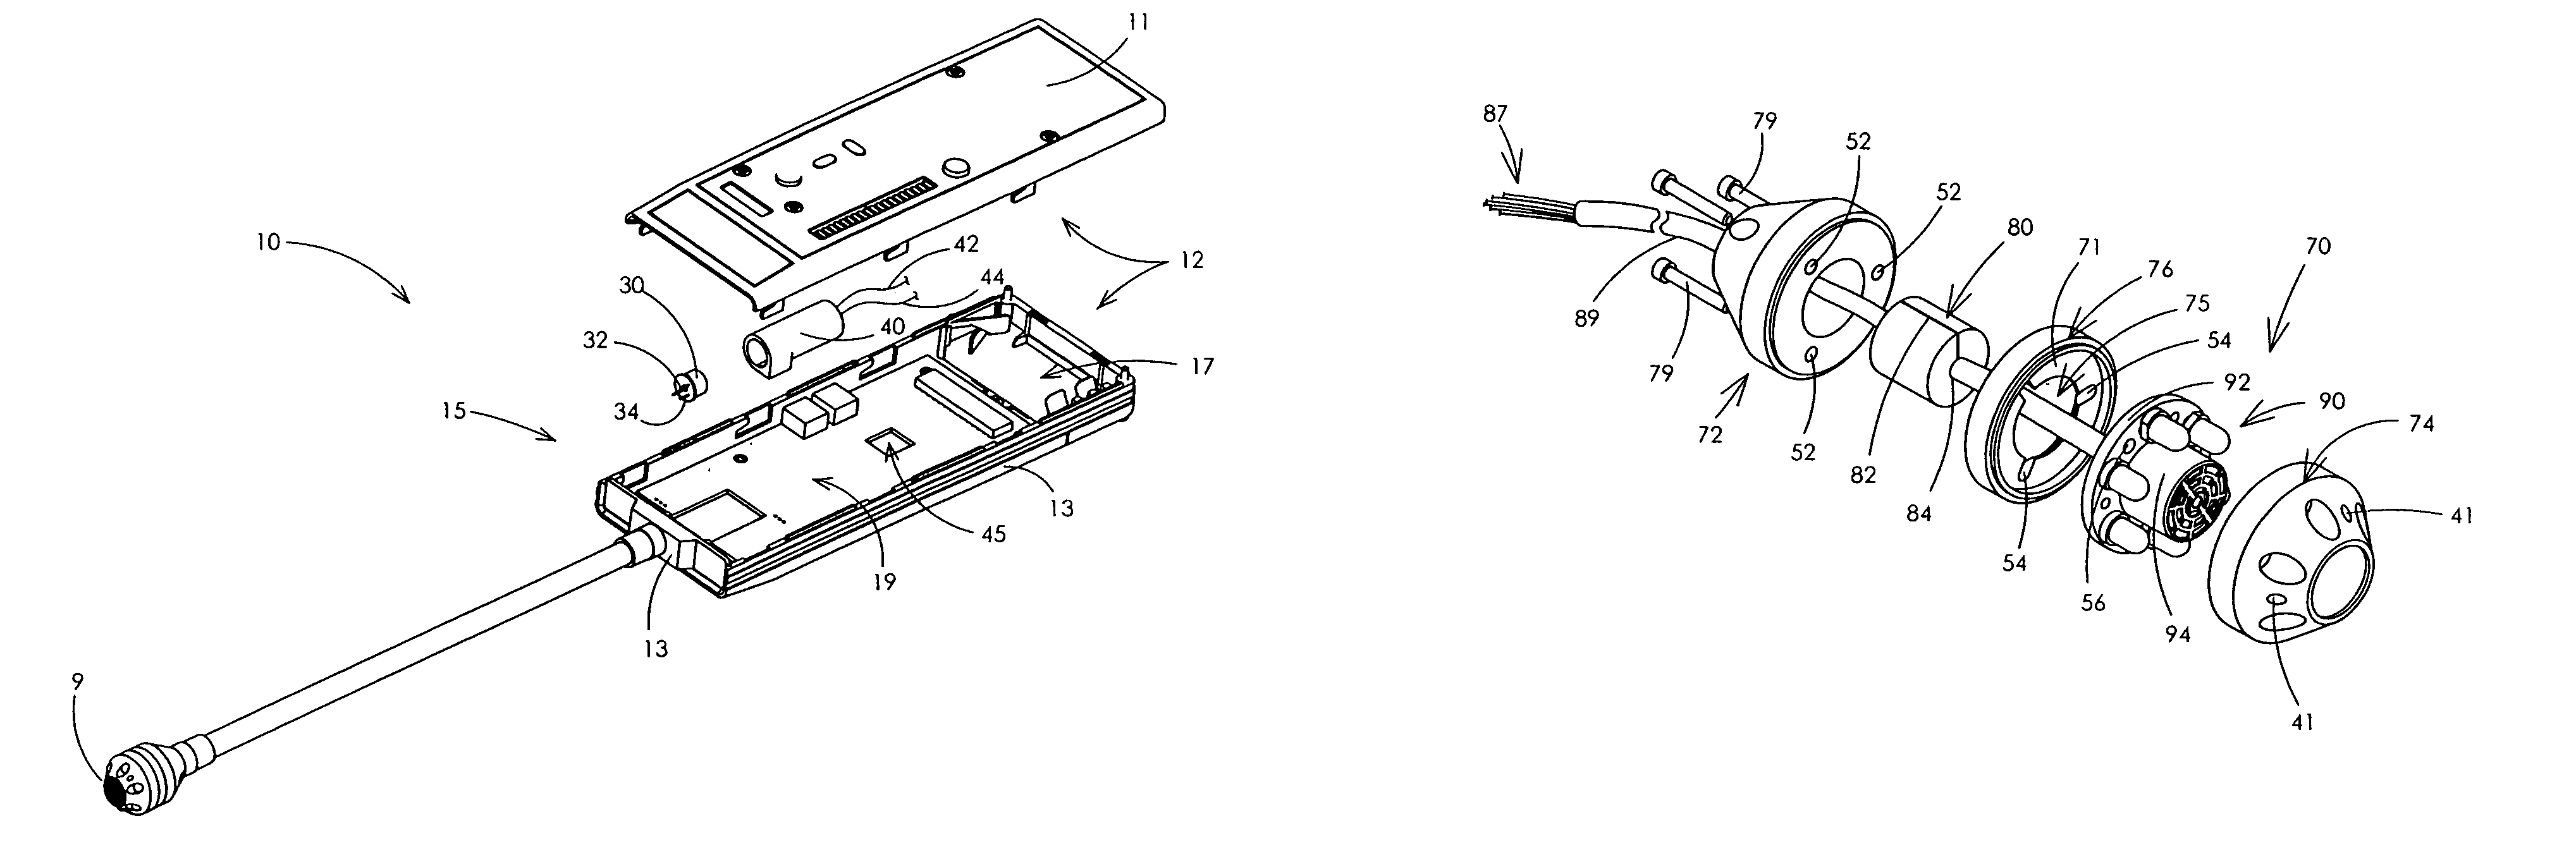 Multi-functional leak detection instrument along with sensor mounting assembly and methodology utilizing the same